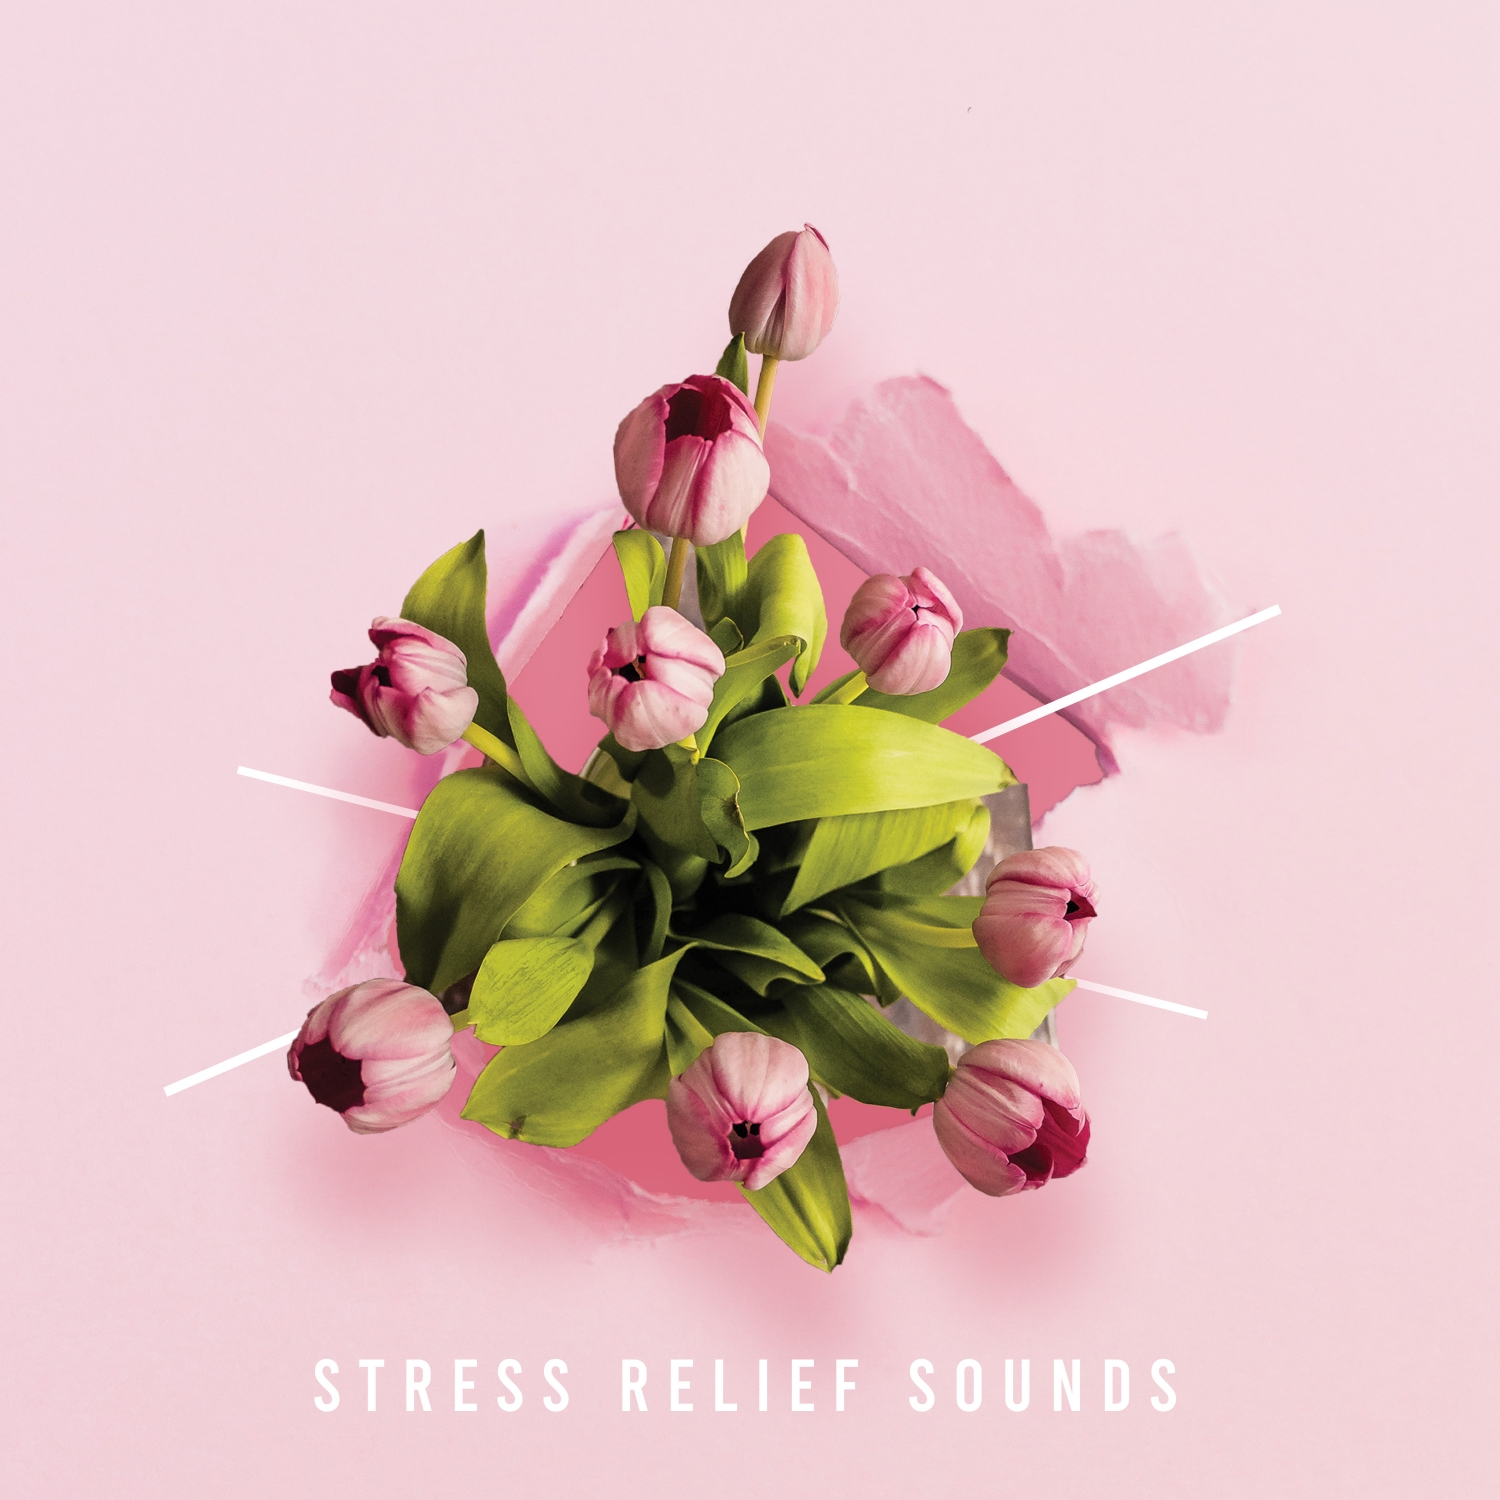 13 Stress Relief Sounds of Nature - Ambient